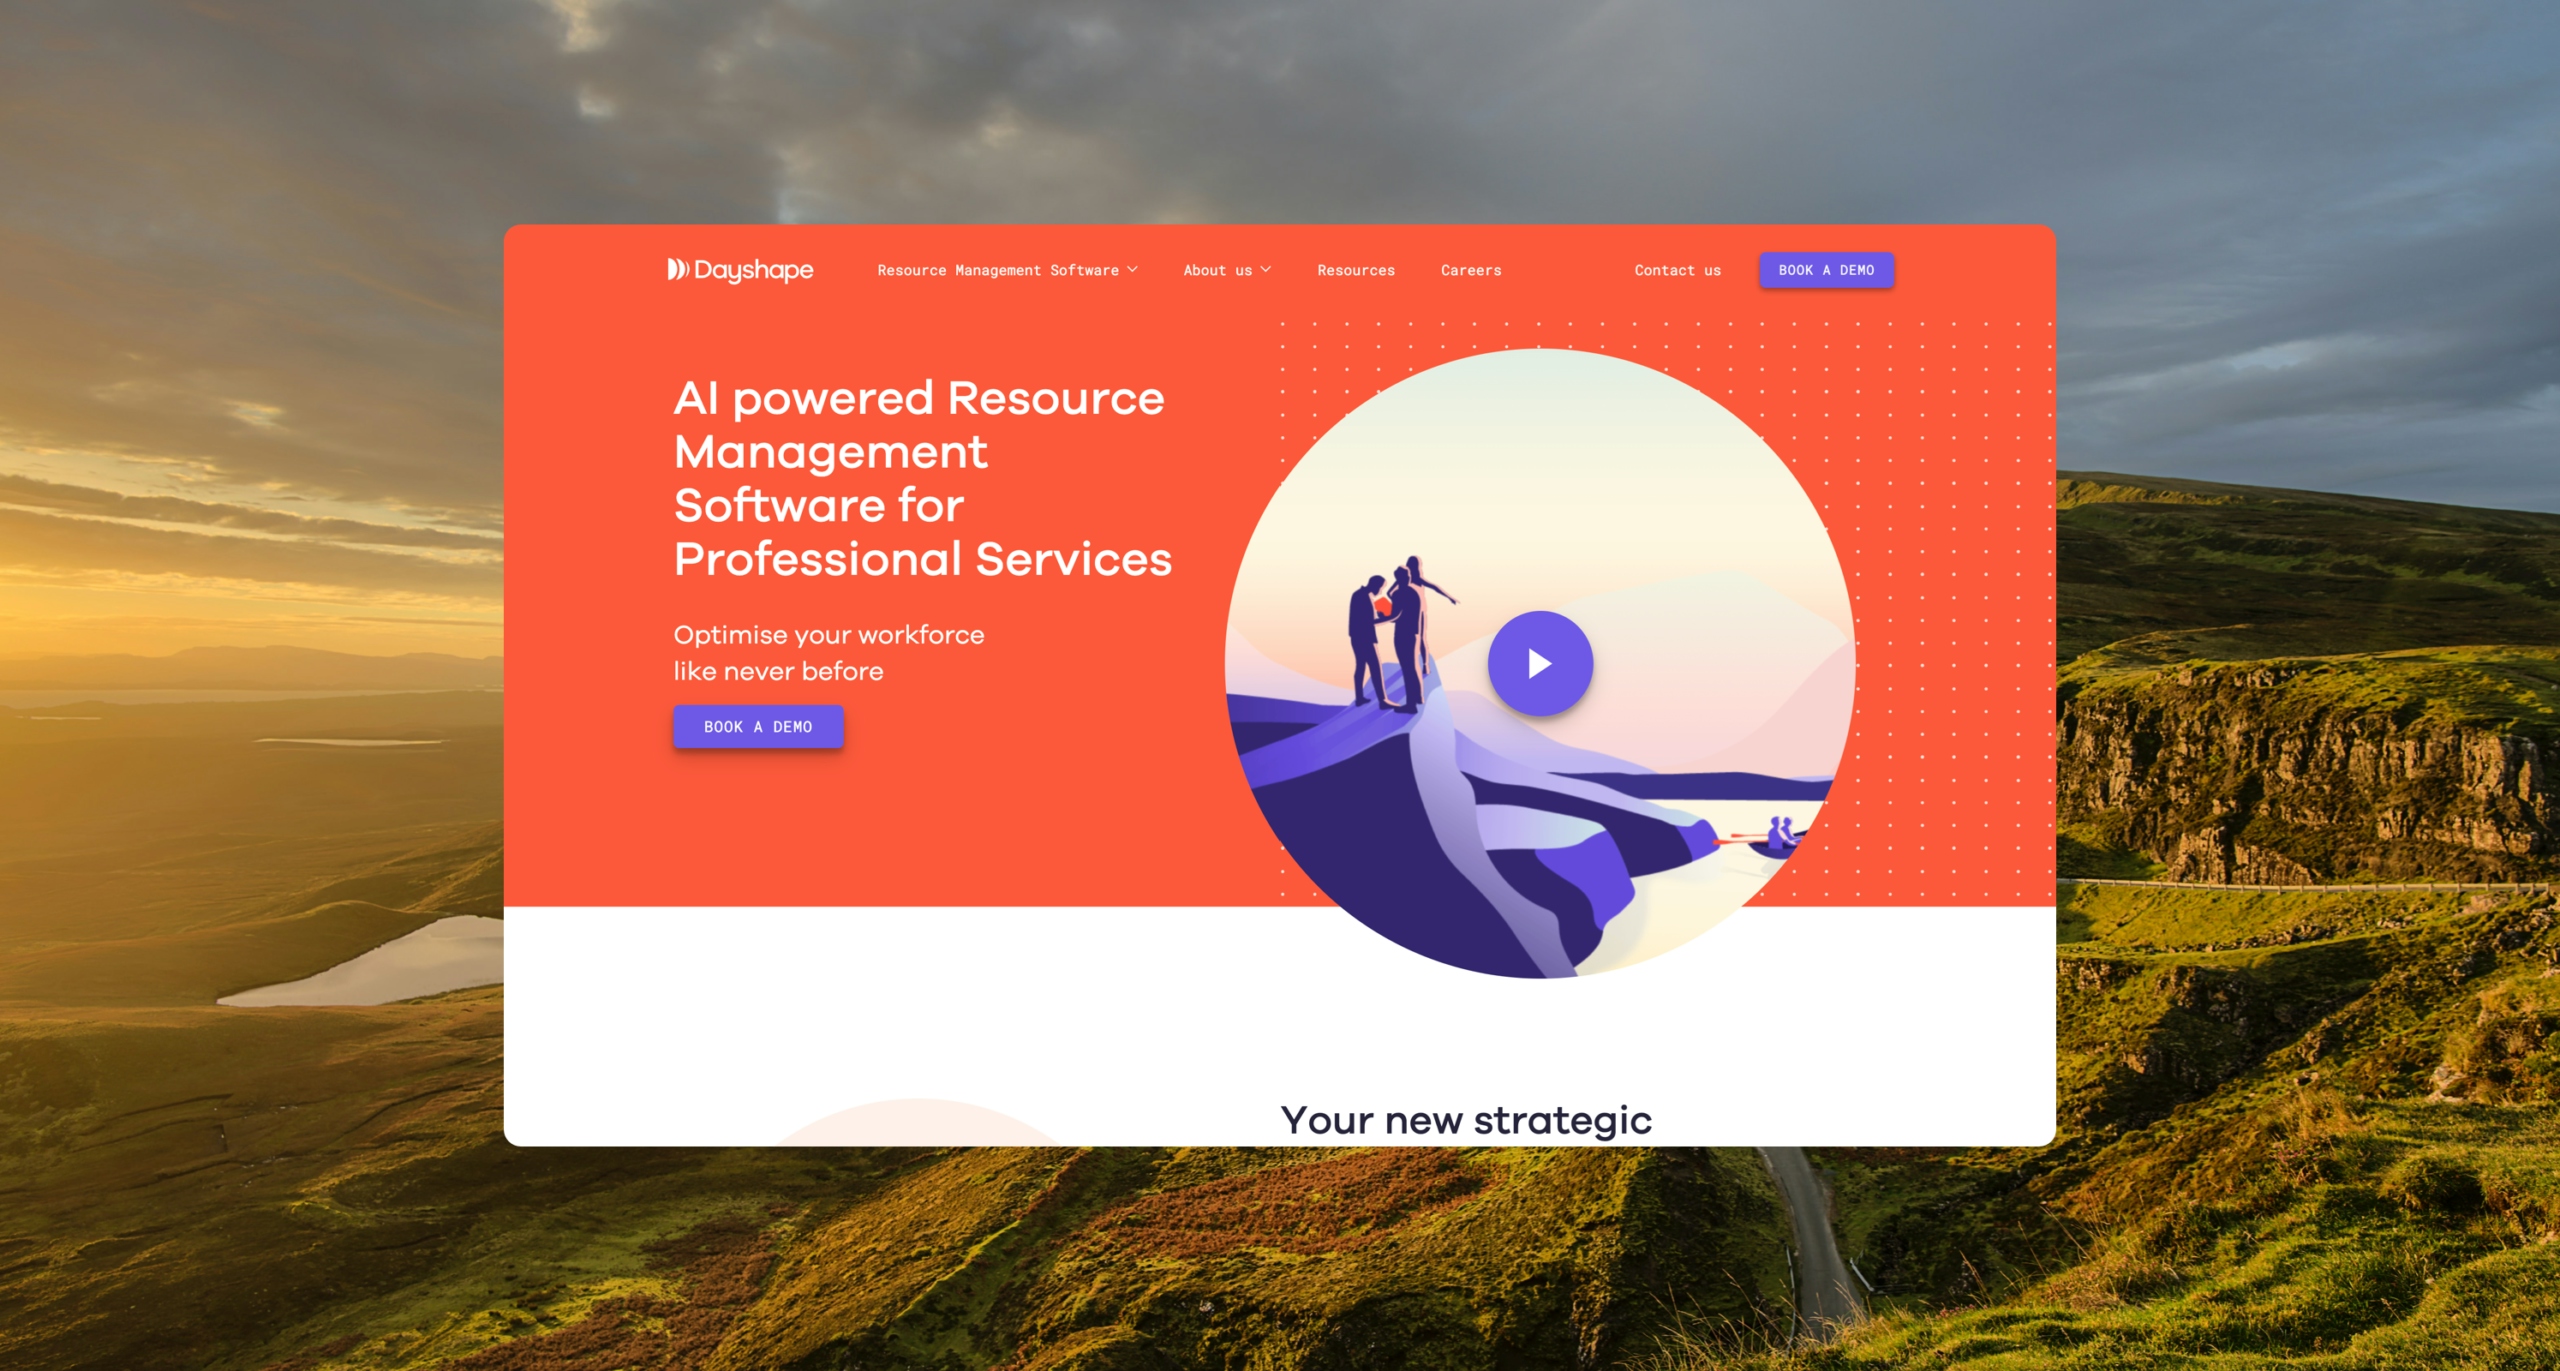 Digital screenshot of Dayshape site stating “Al powered Resource Management Software for Professional Services. Optimise your workforce like never before “Book a demo” and there is a video player with three people standing on some stylised hills.